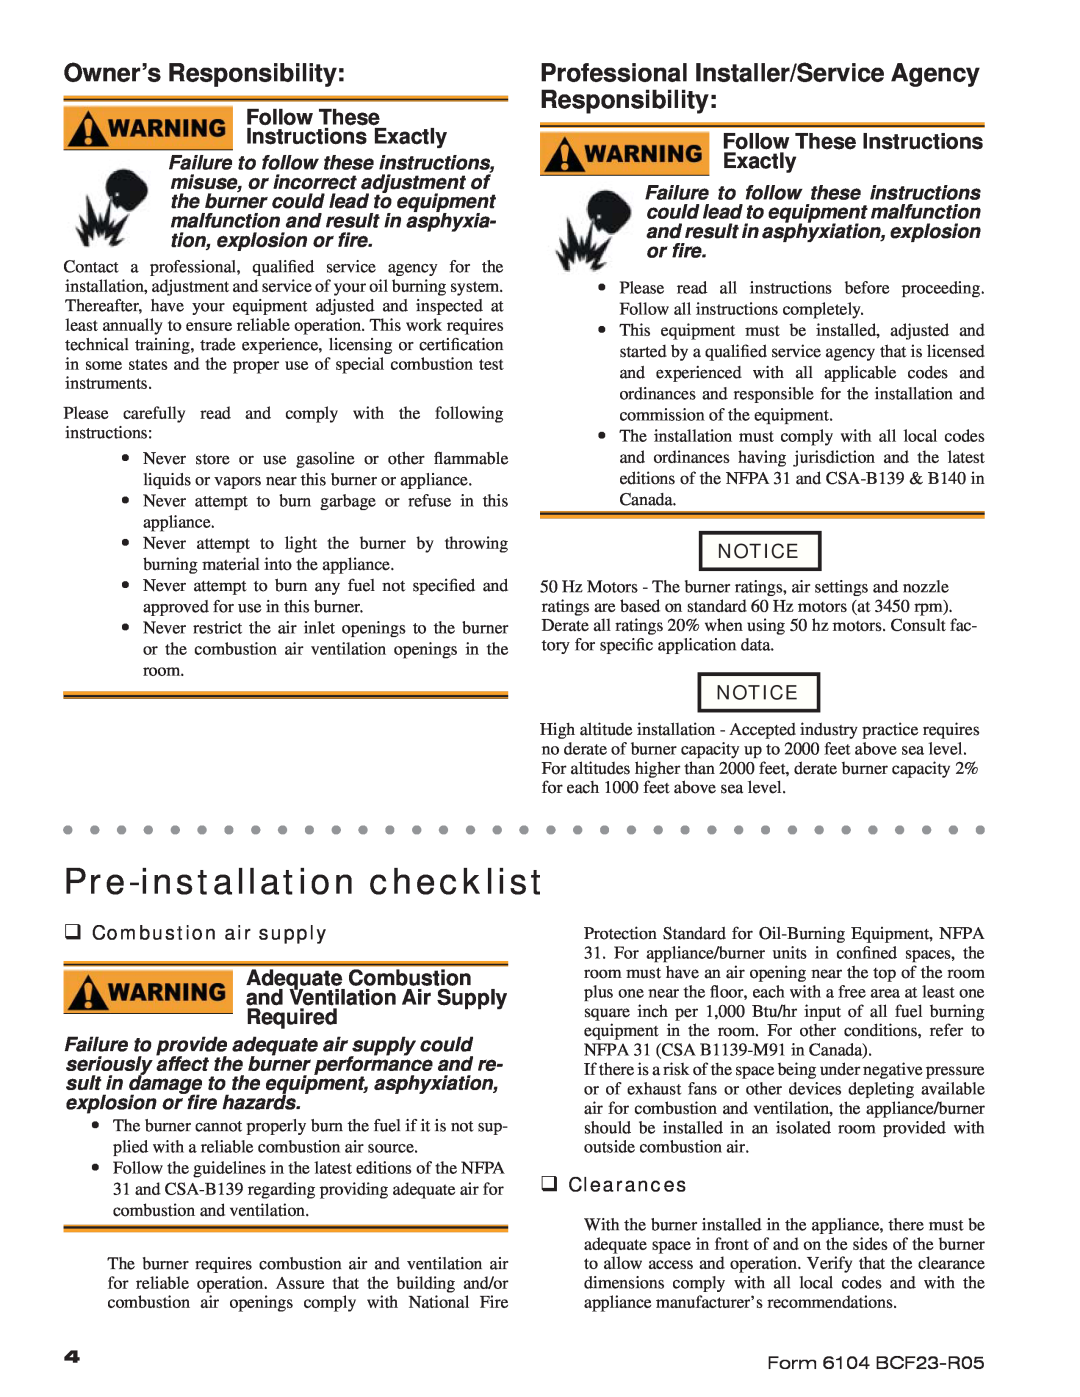 Beckett CF2300 Pre-installation checklist, Owner’s Responsibility, Professional Installer/Service Agency Responsibility 